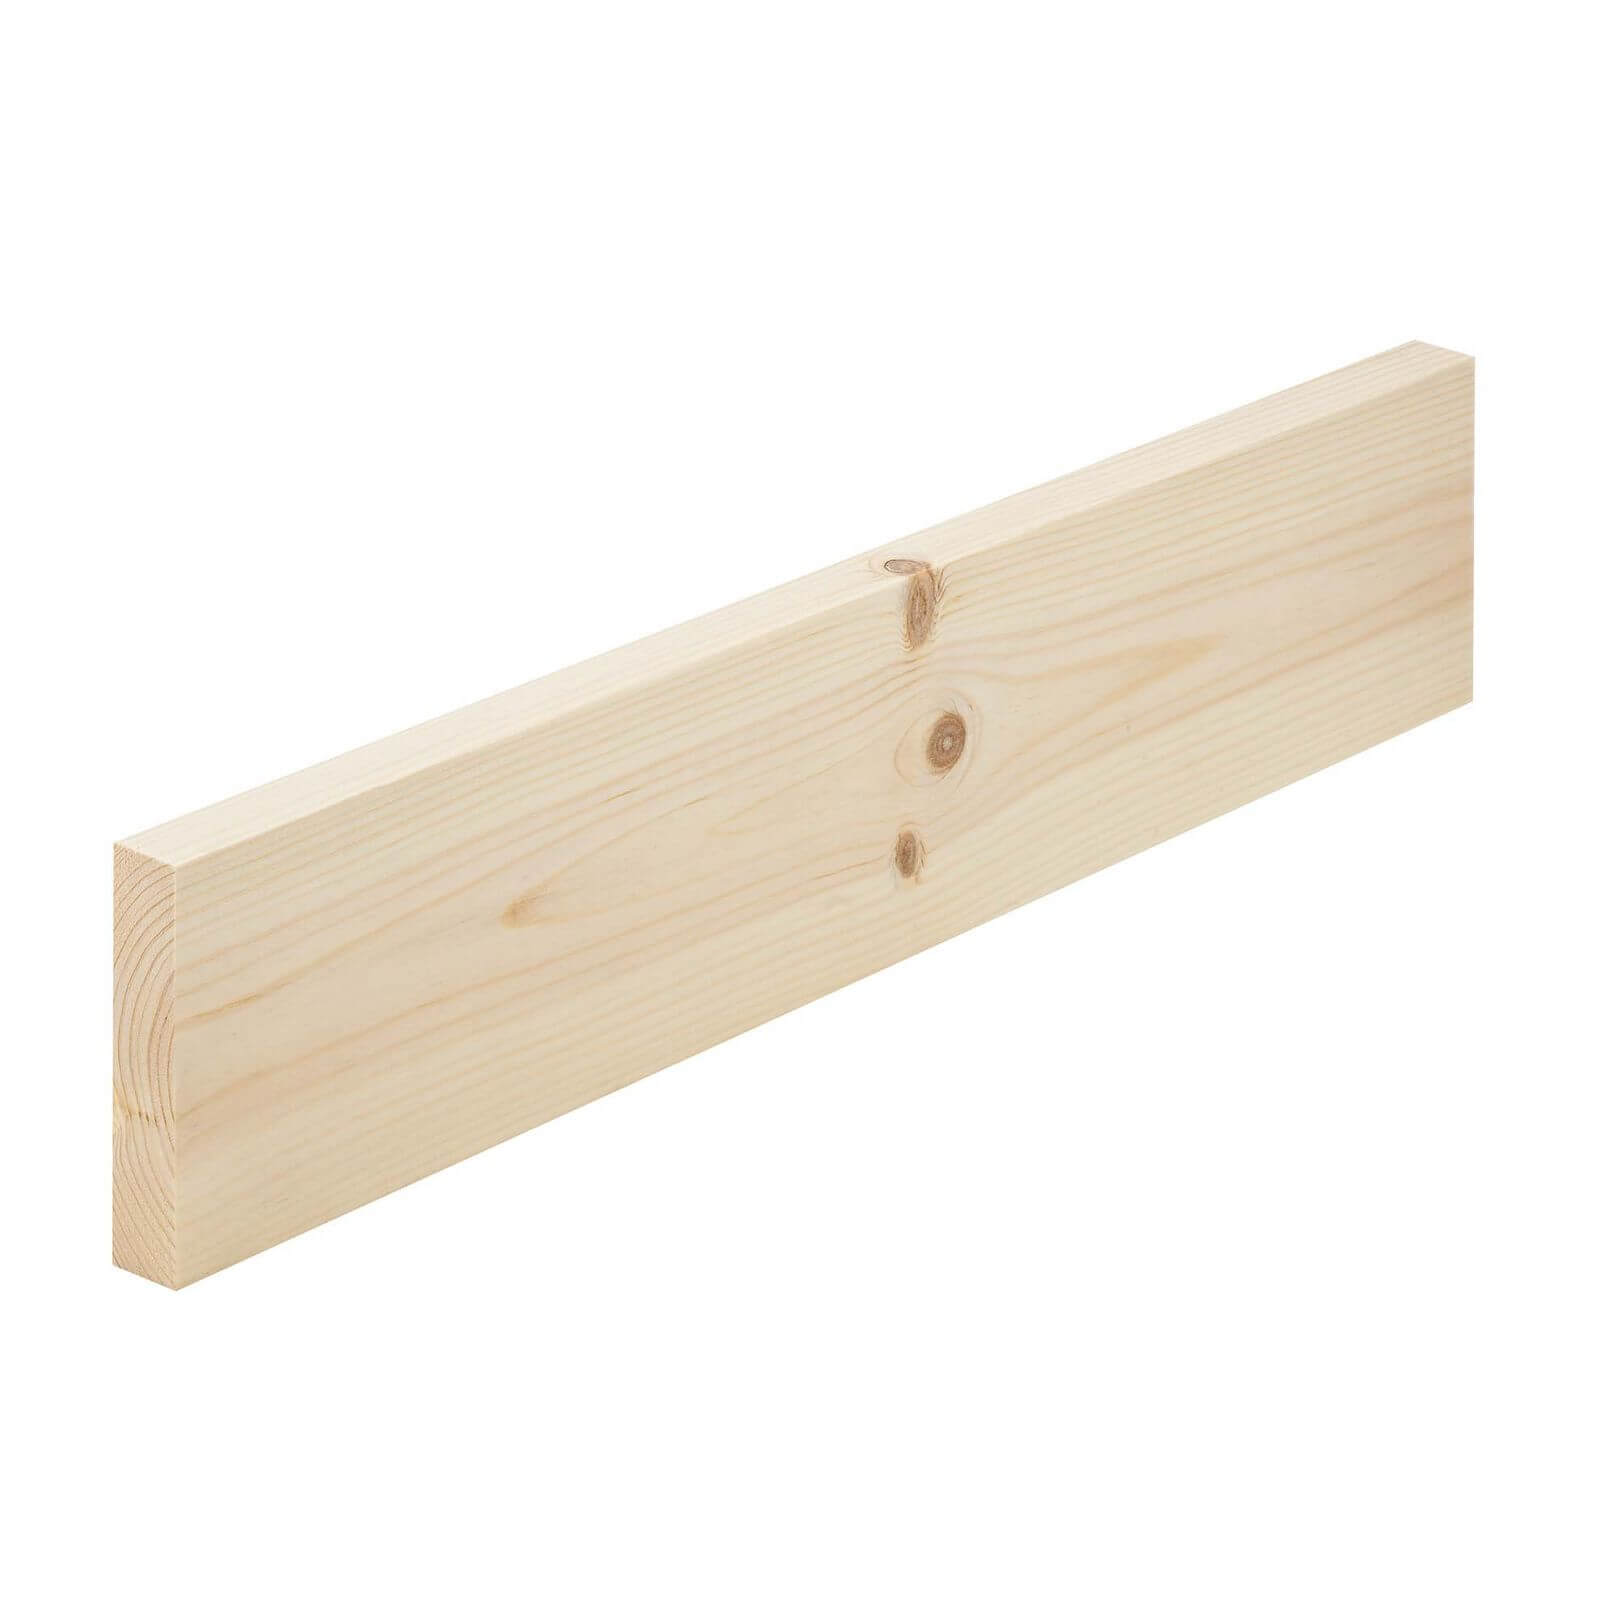 Photo of Metsa Planed Square Edge Stick Softwood Timber 2.4m -22mm X 100mm X 2400mm-